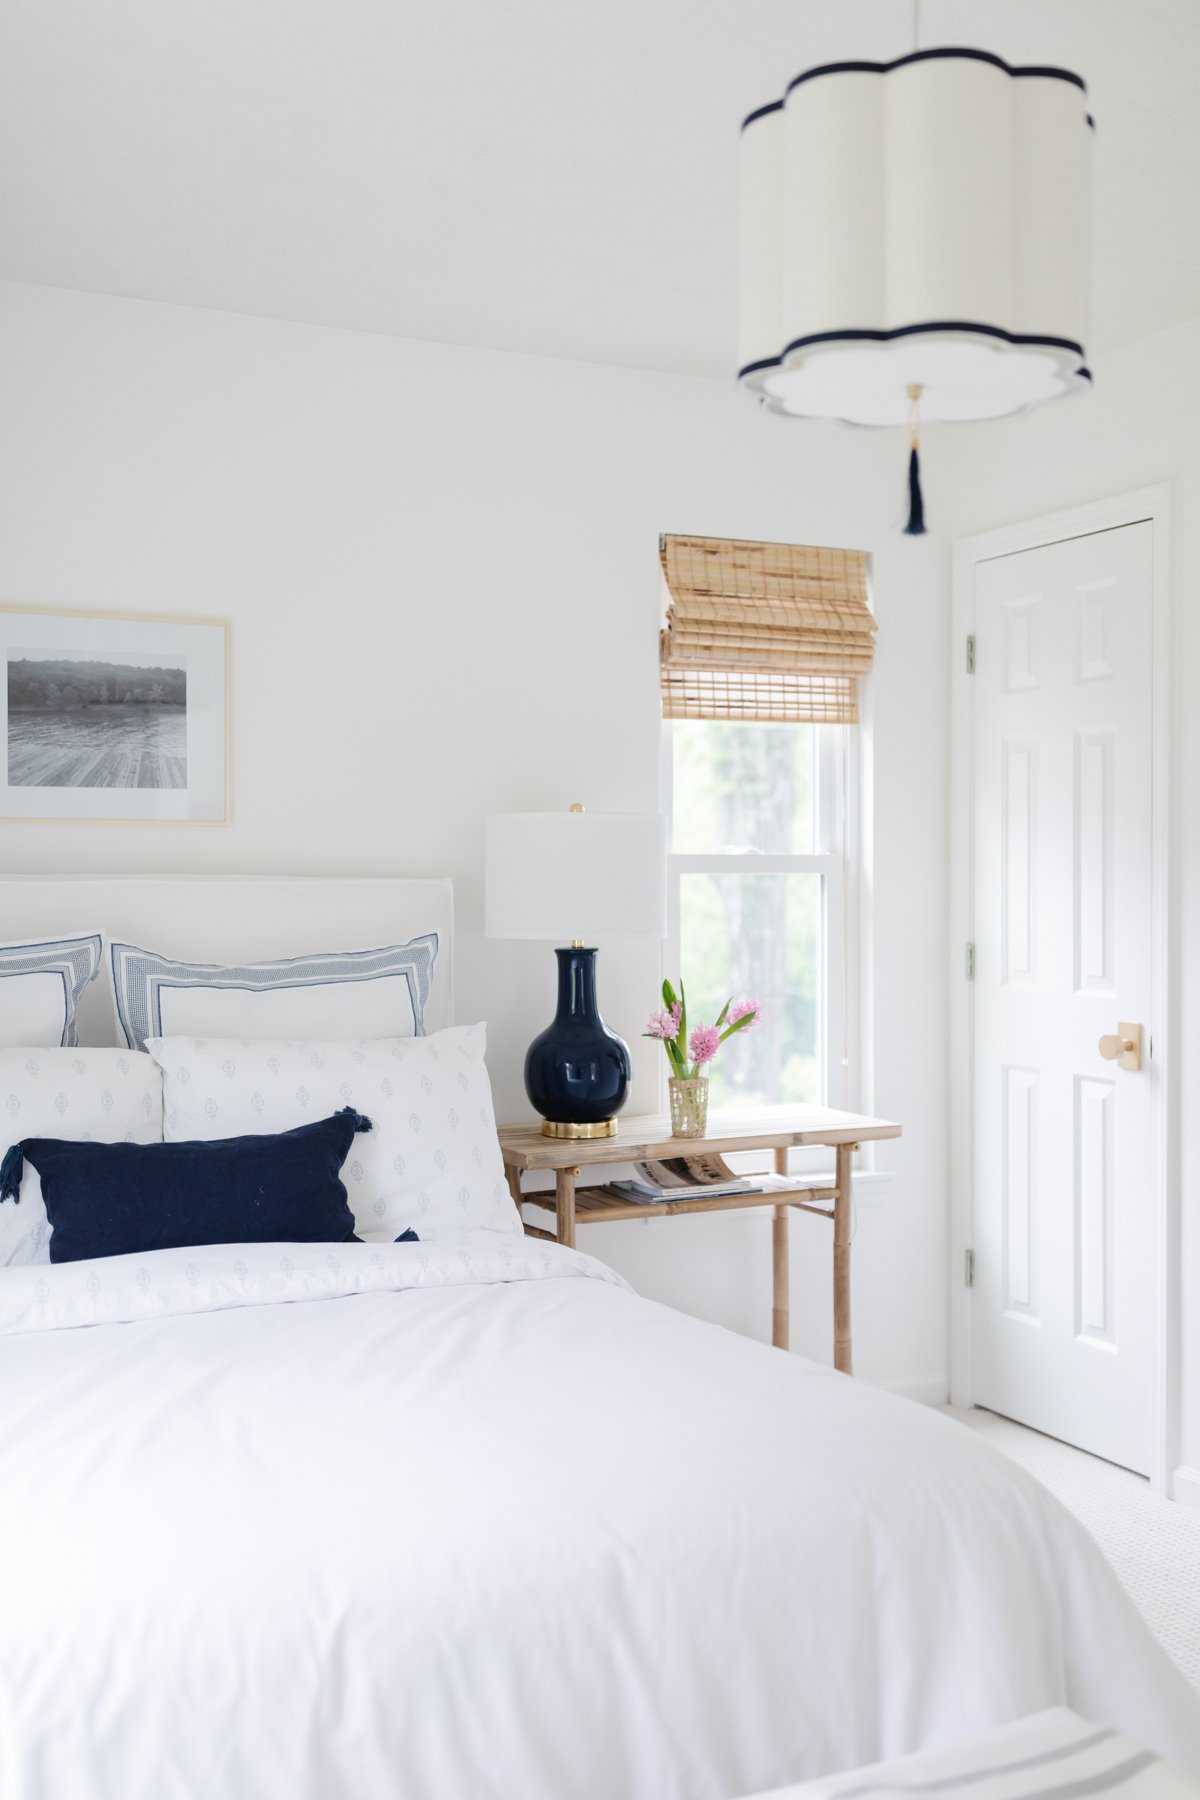 A simple guest bedroom in white and navy in a guide to minimalist lifestyle.